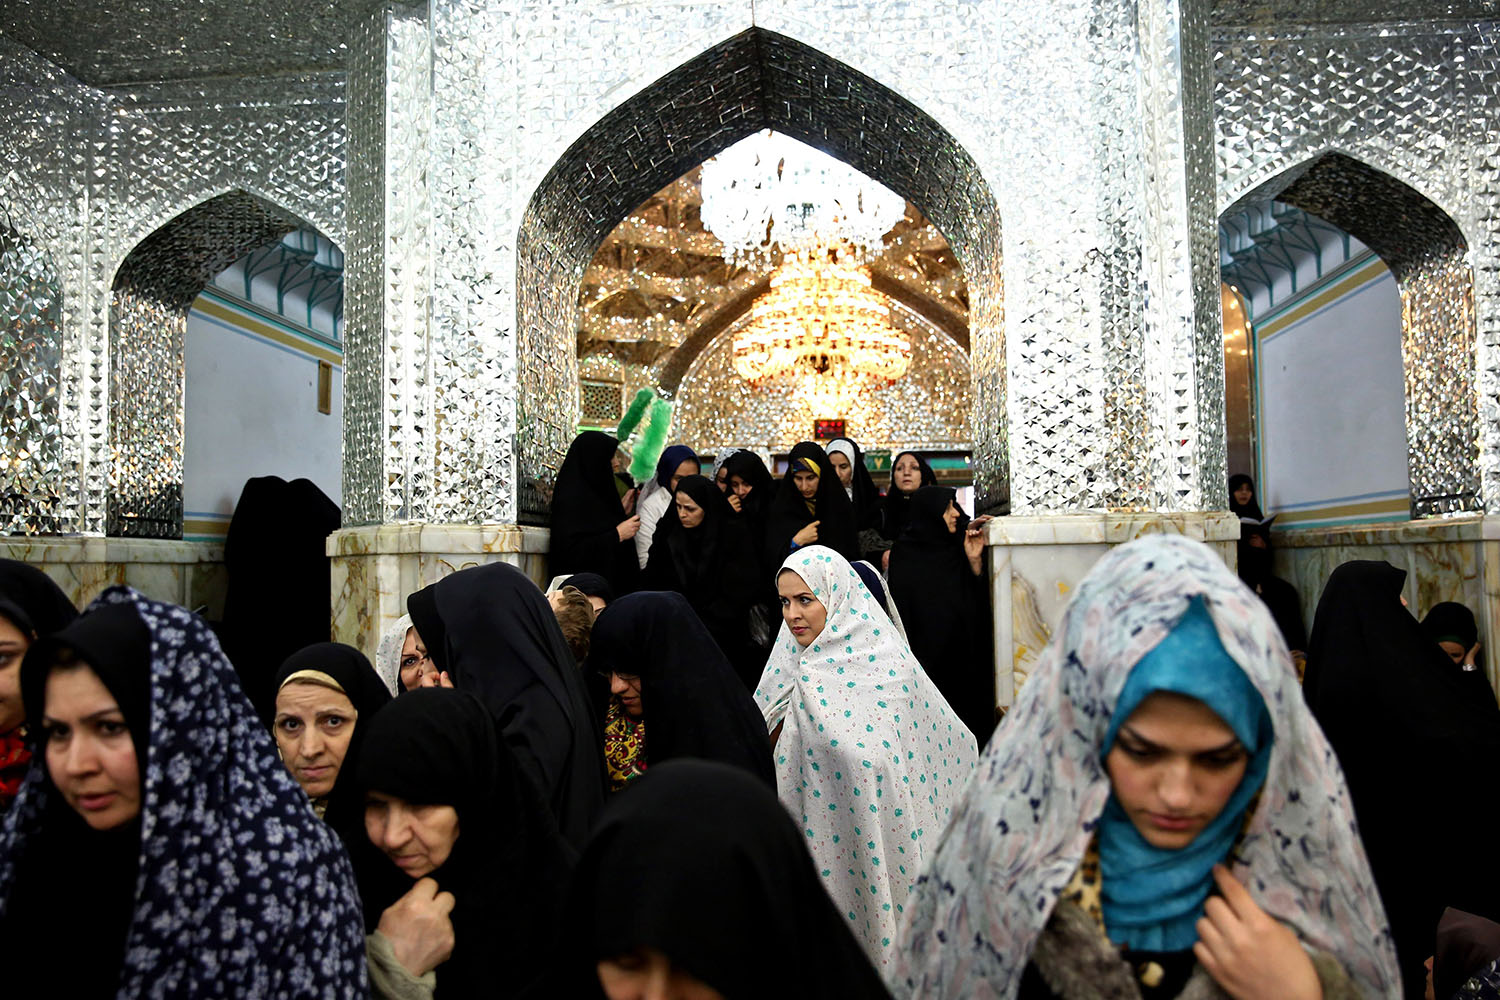 Apr. 3, 2014. Iranian women gather at the shrine of the Shiite Saint Imam Abdulazim, in Shahr-e-Ray, south of Tehran, Iran, on the occasion of the death anniversary of  Fatima, the daughter of Islam's Prophet Muhammad.